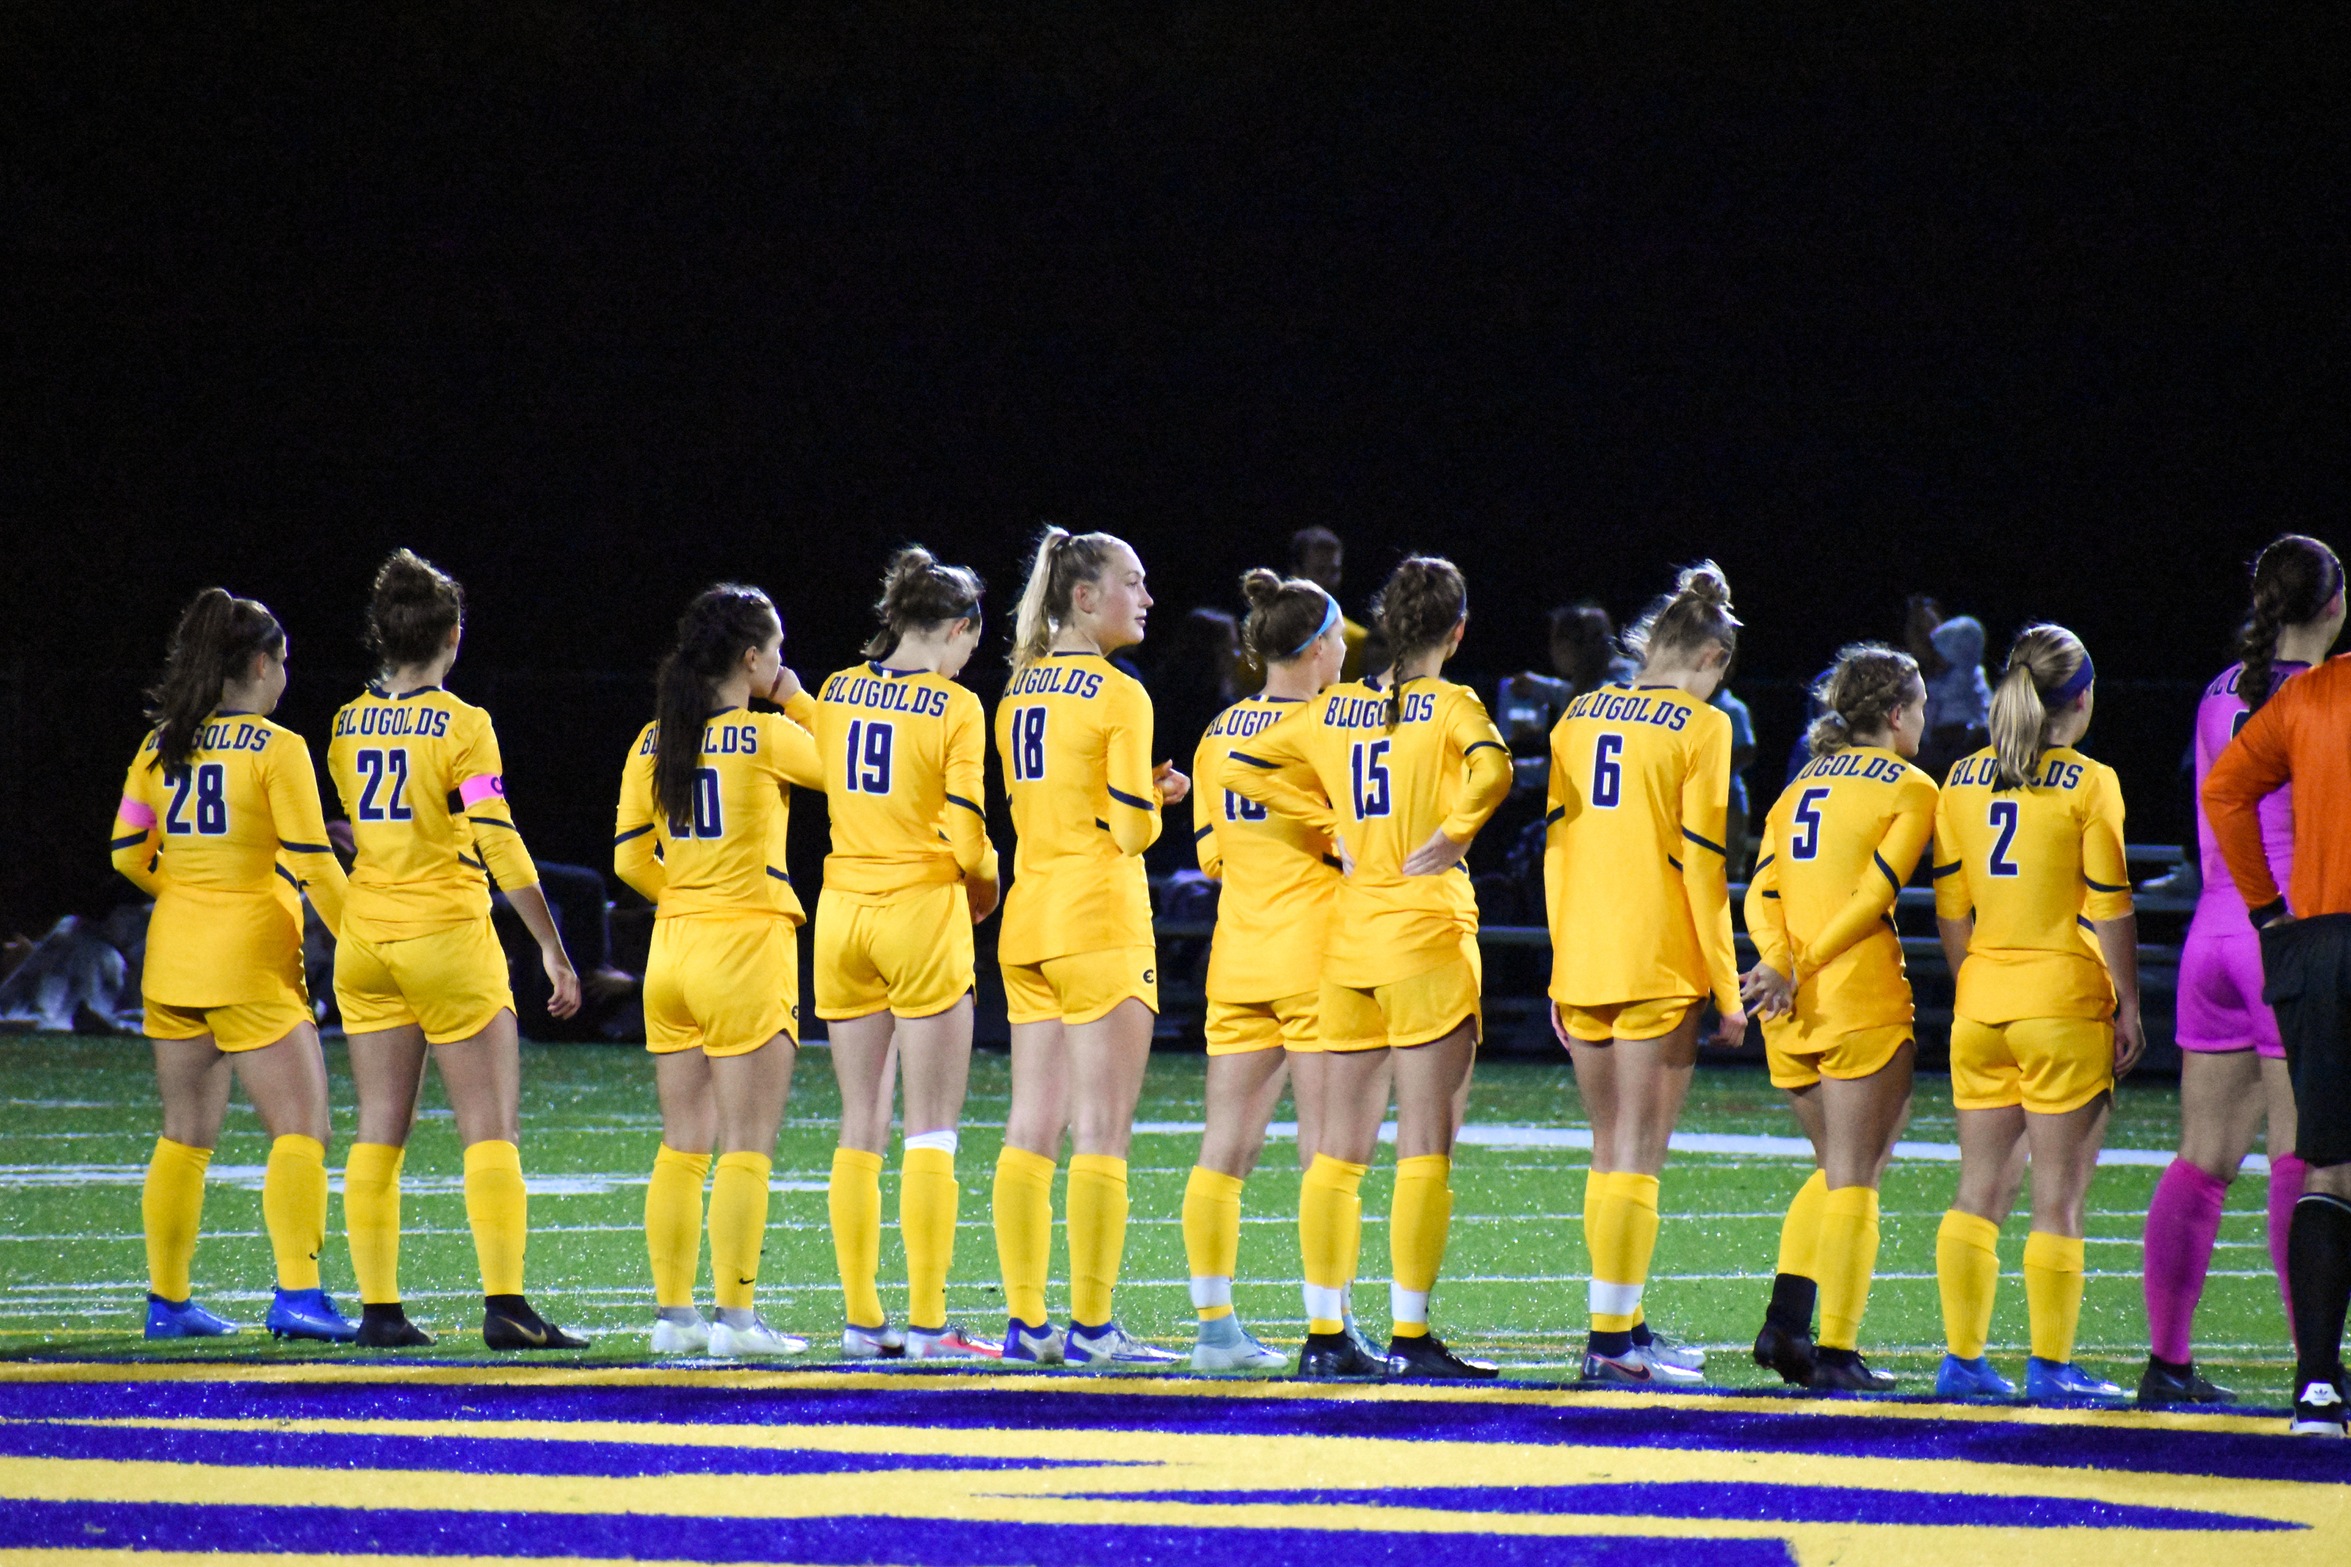 Blugolds Lose Heartbreaker at Home After Late Pointer Goal